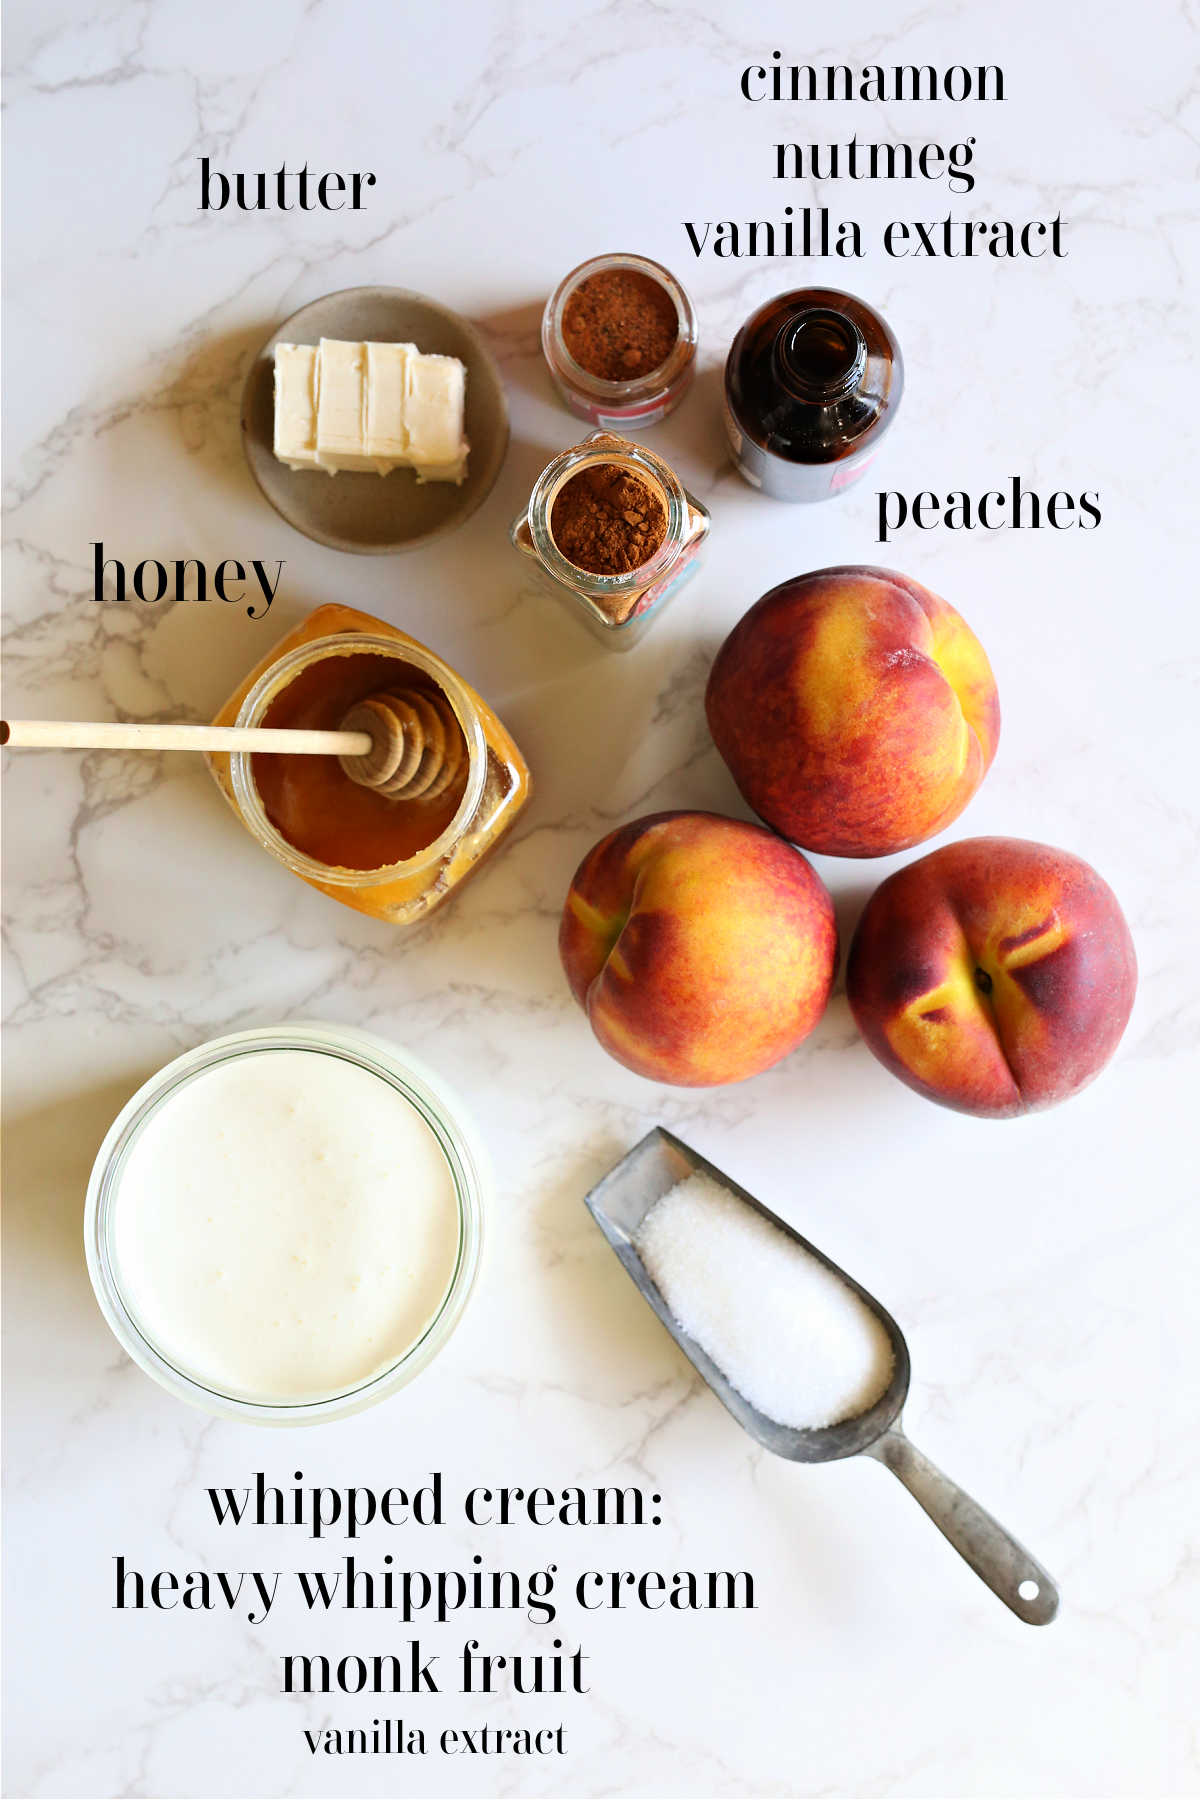 Key ingredients for stuffed peaches including peaches, honey, whipped cream, cinnamon, nutmeg.